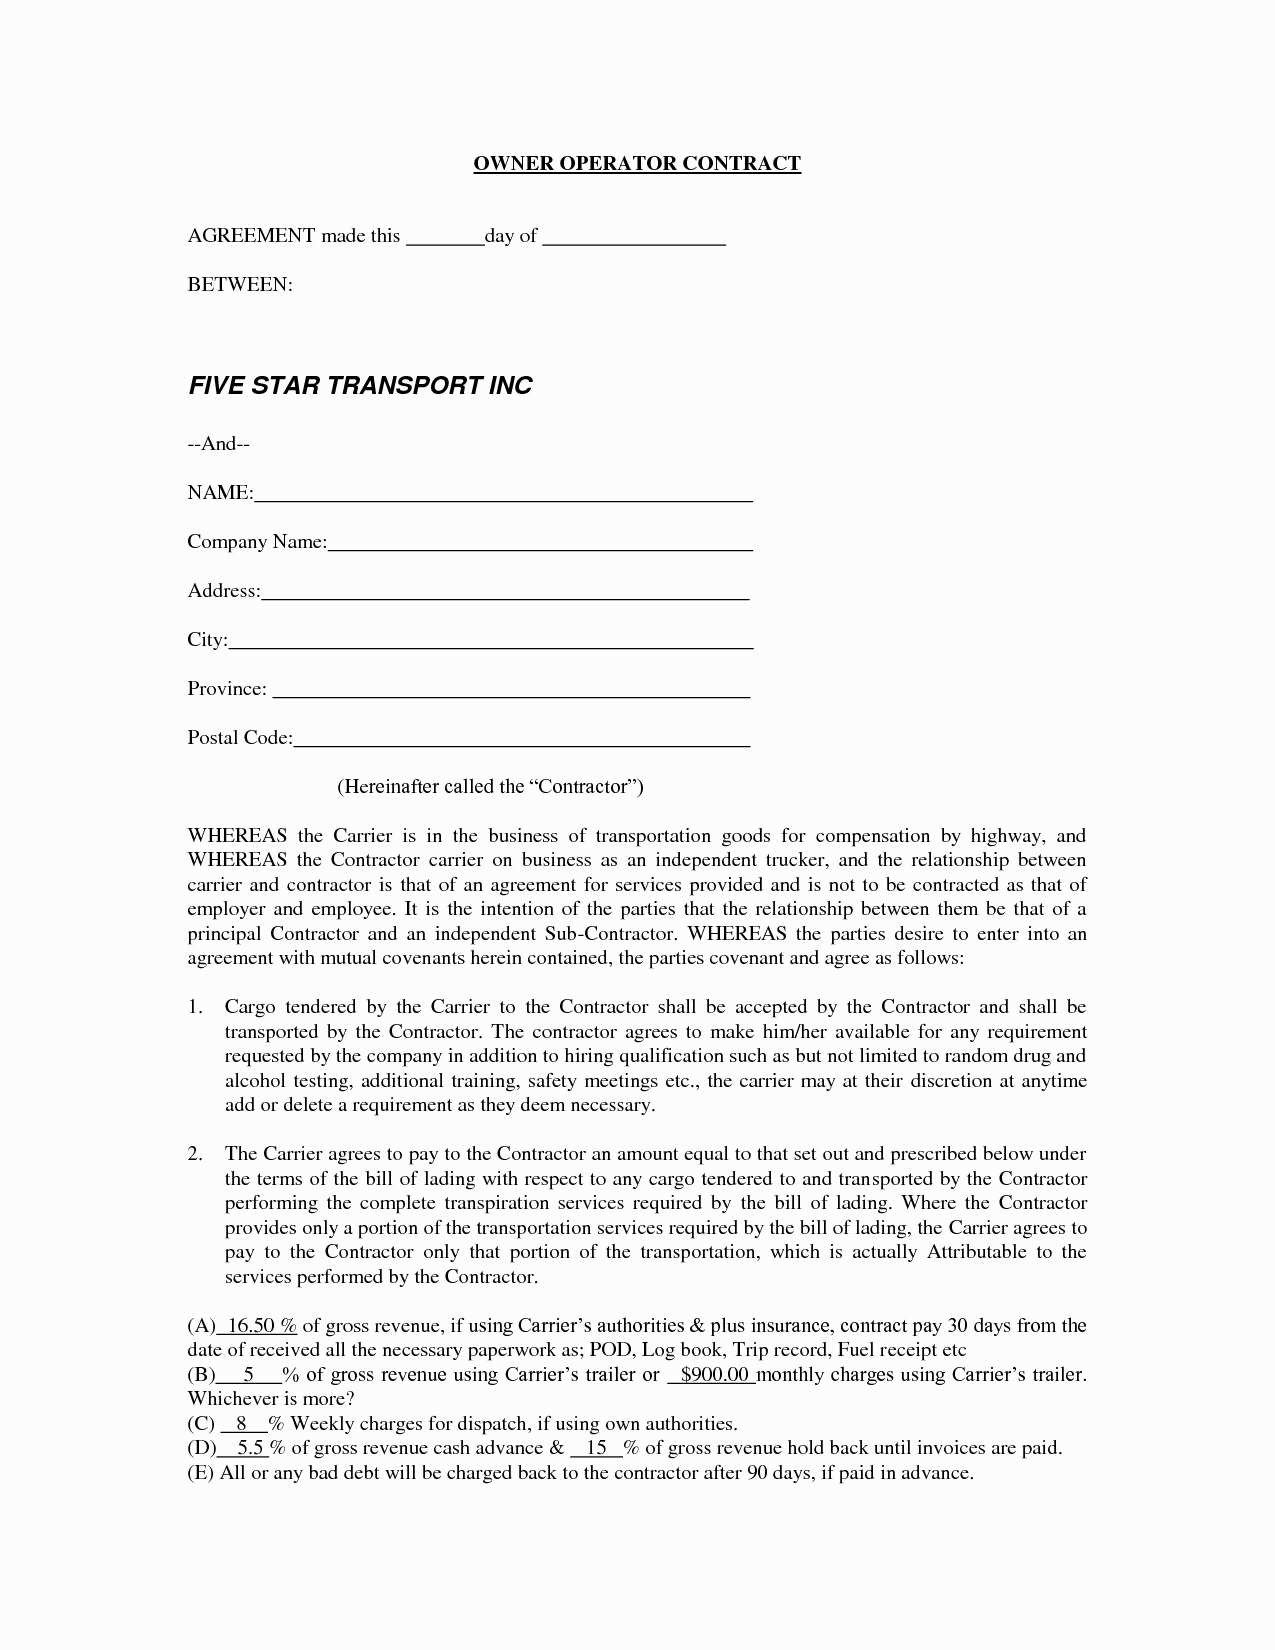 Agreement Between Driver and Owner Best Trucking Pany